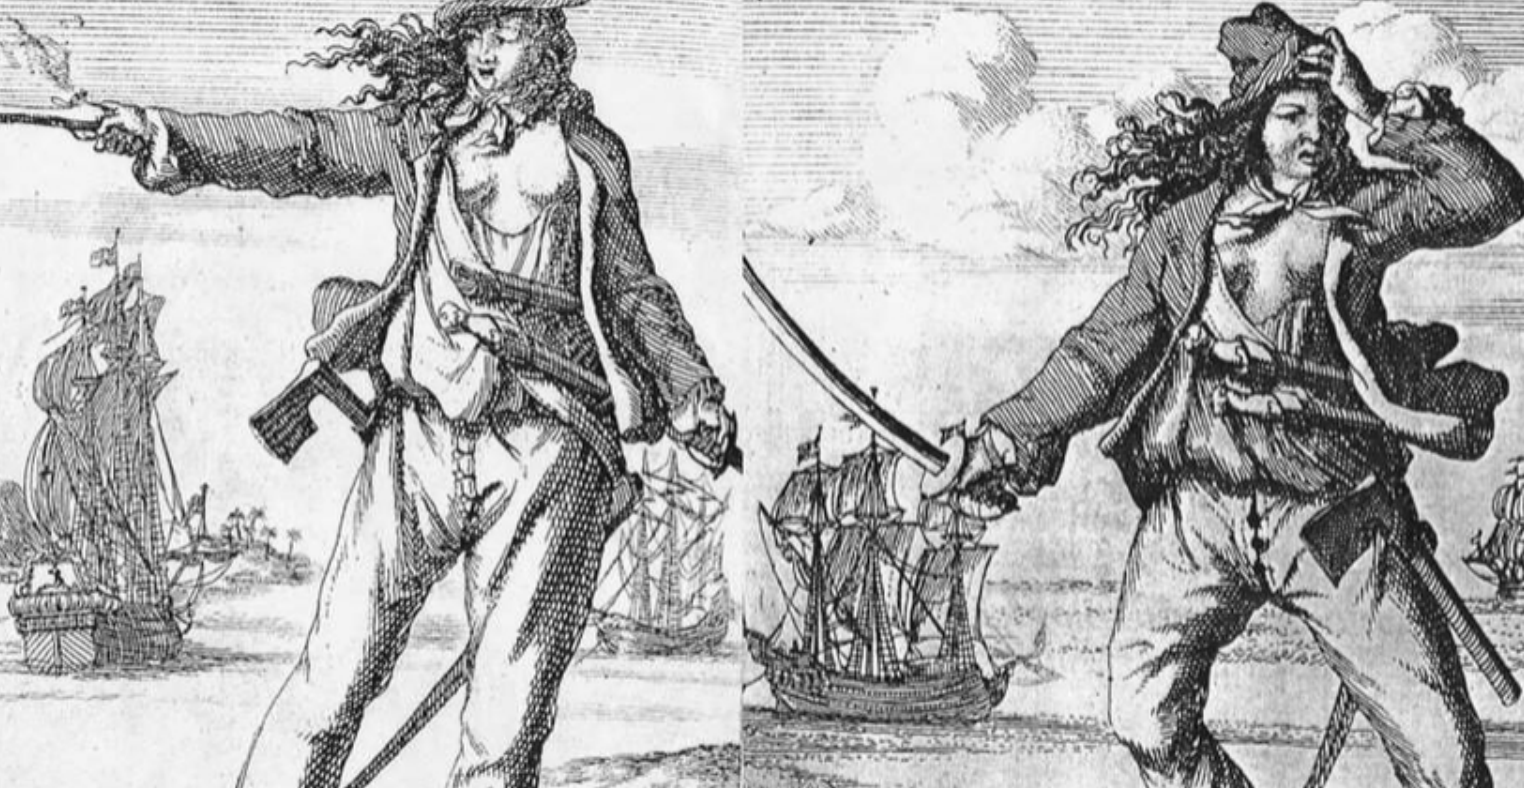 Women pirates were just as ruthless and cunning as the men